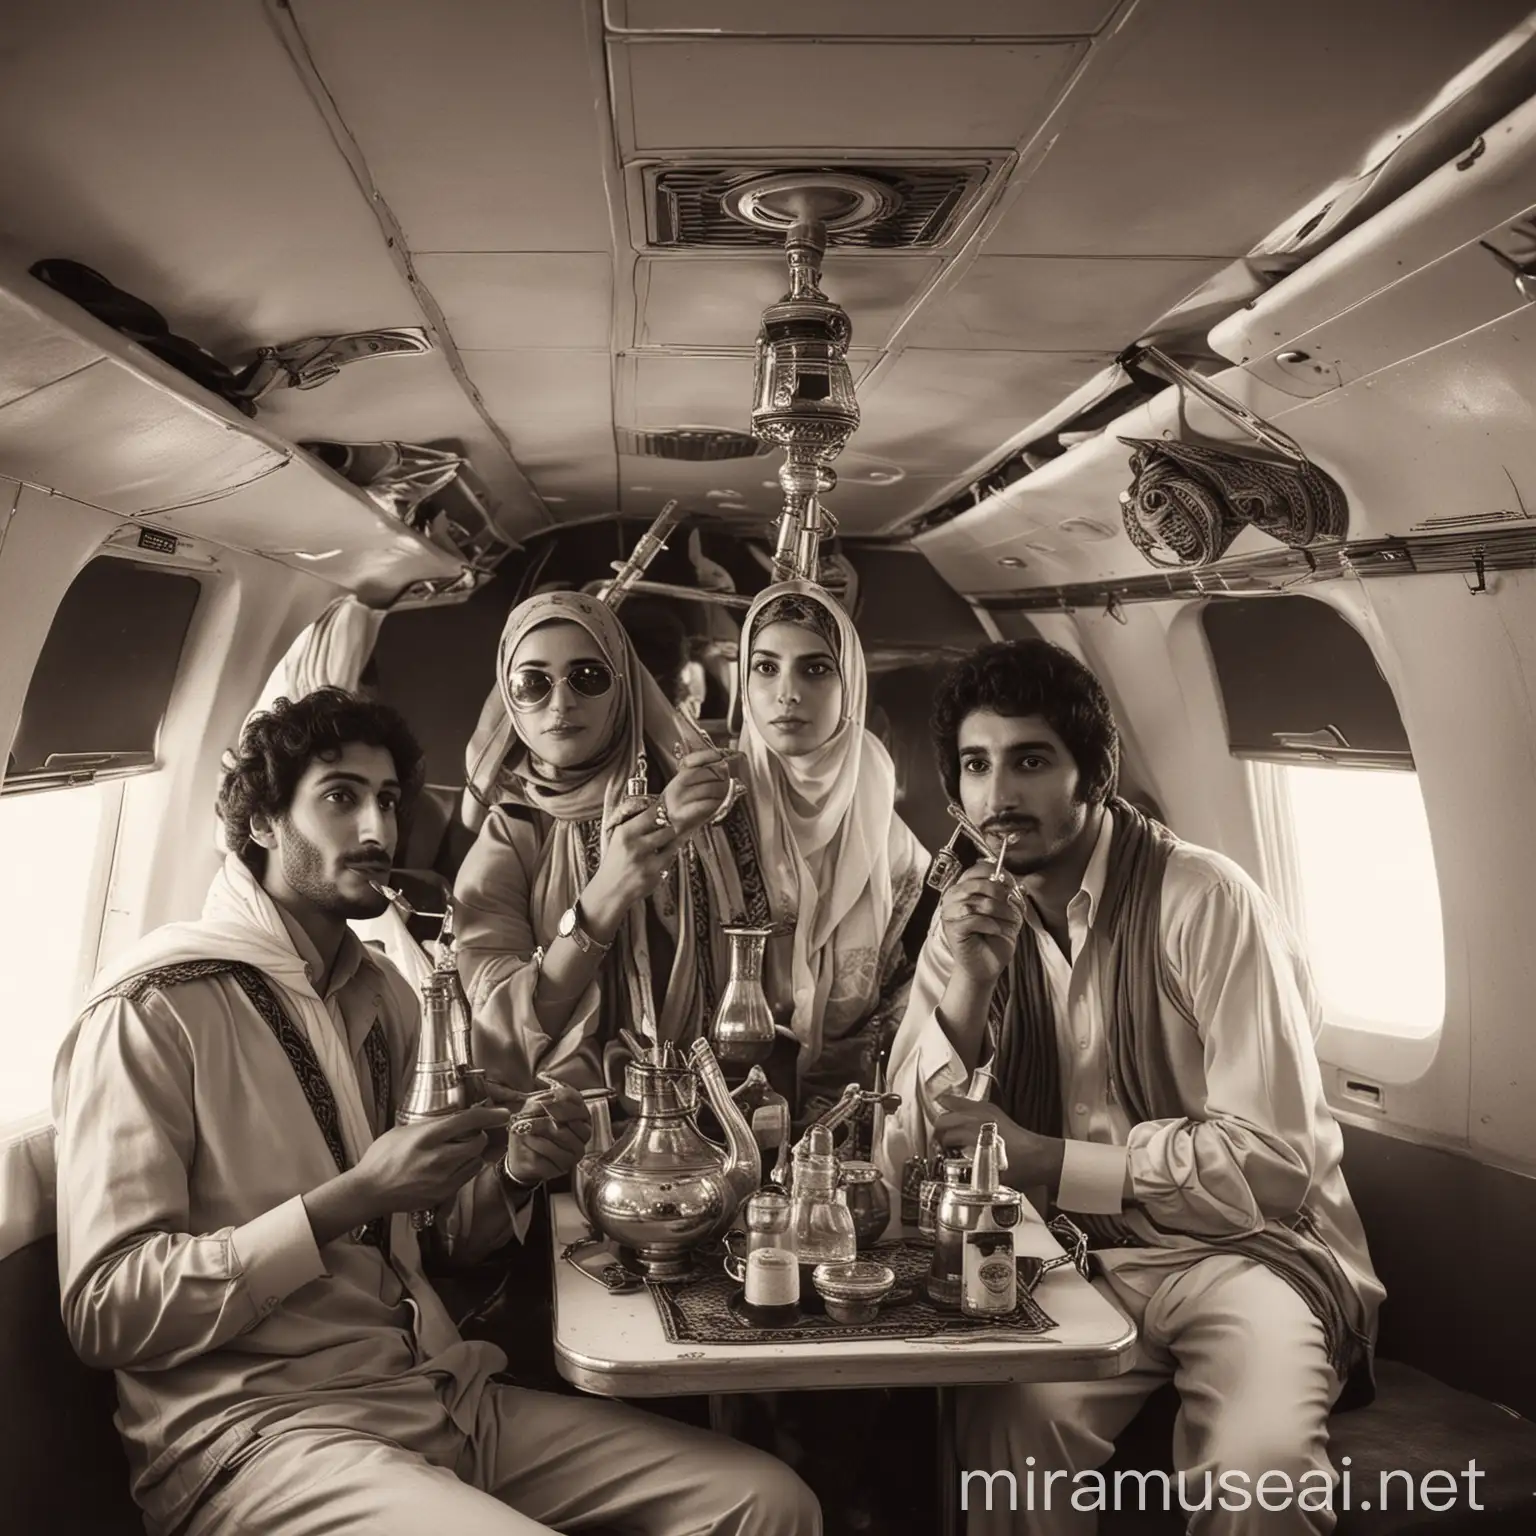 70's - 80's arabs on an airplane doing one shisha, make the photo in black and white or sepia.